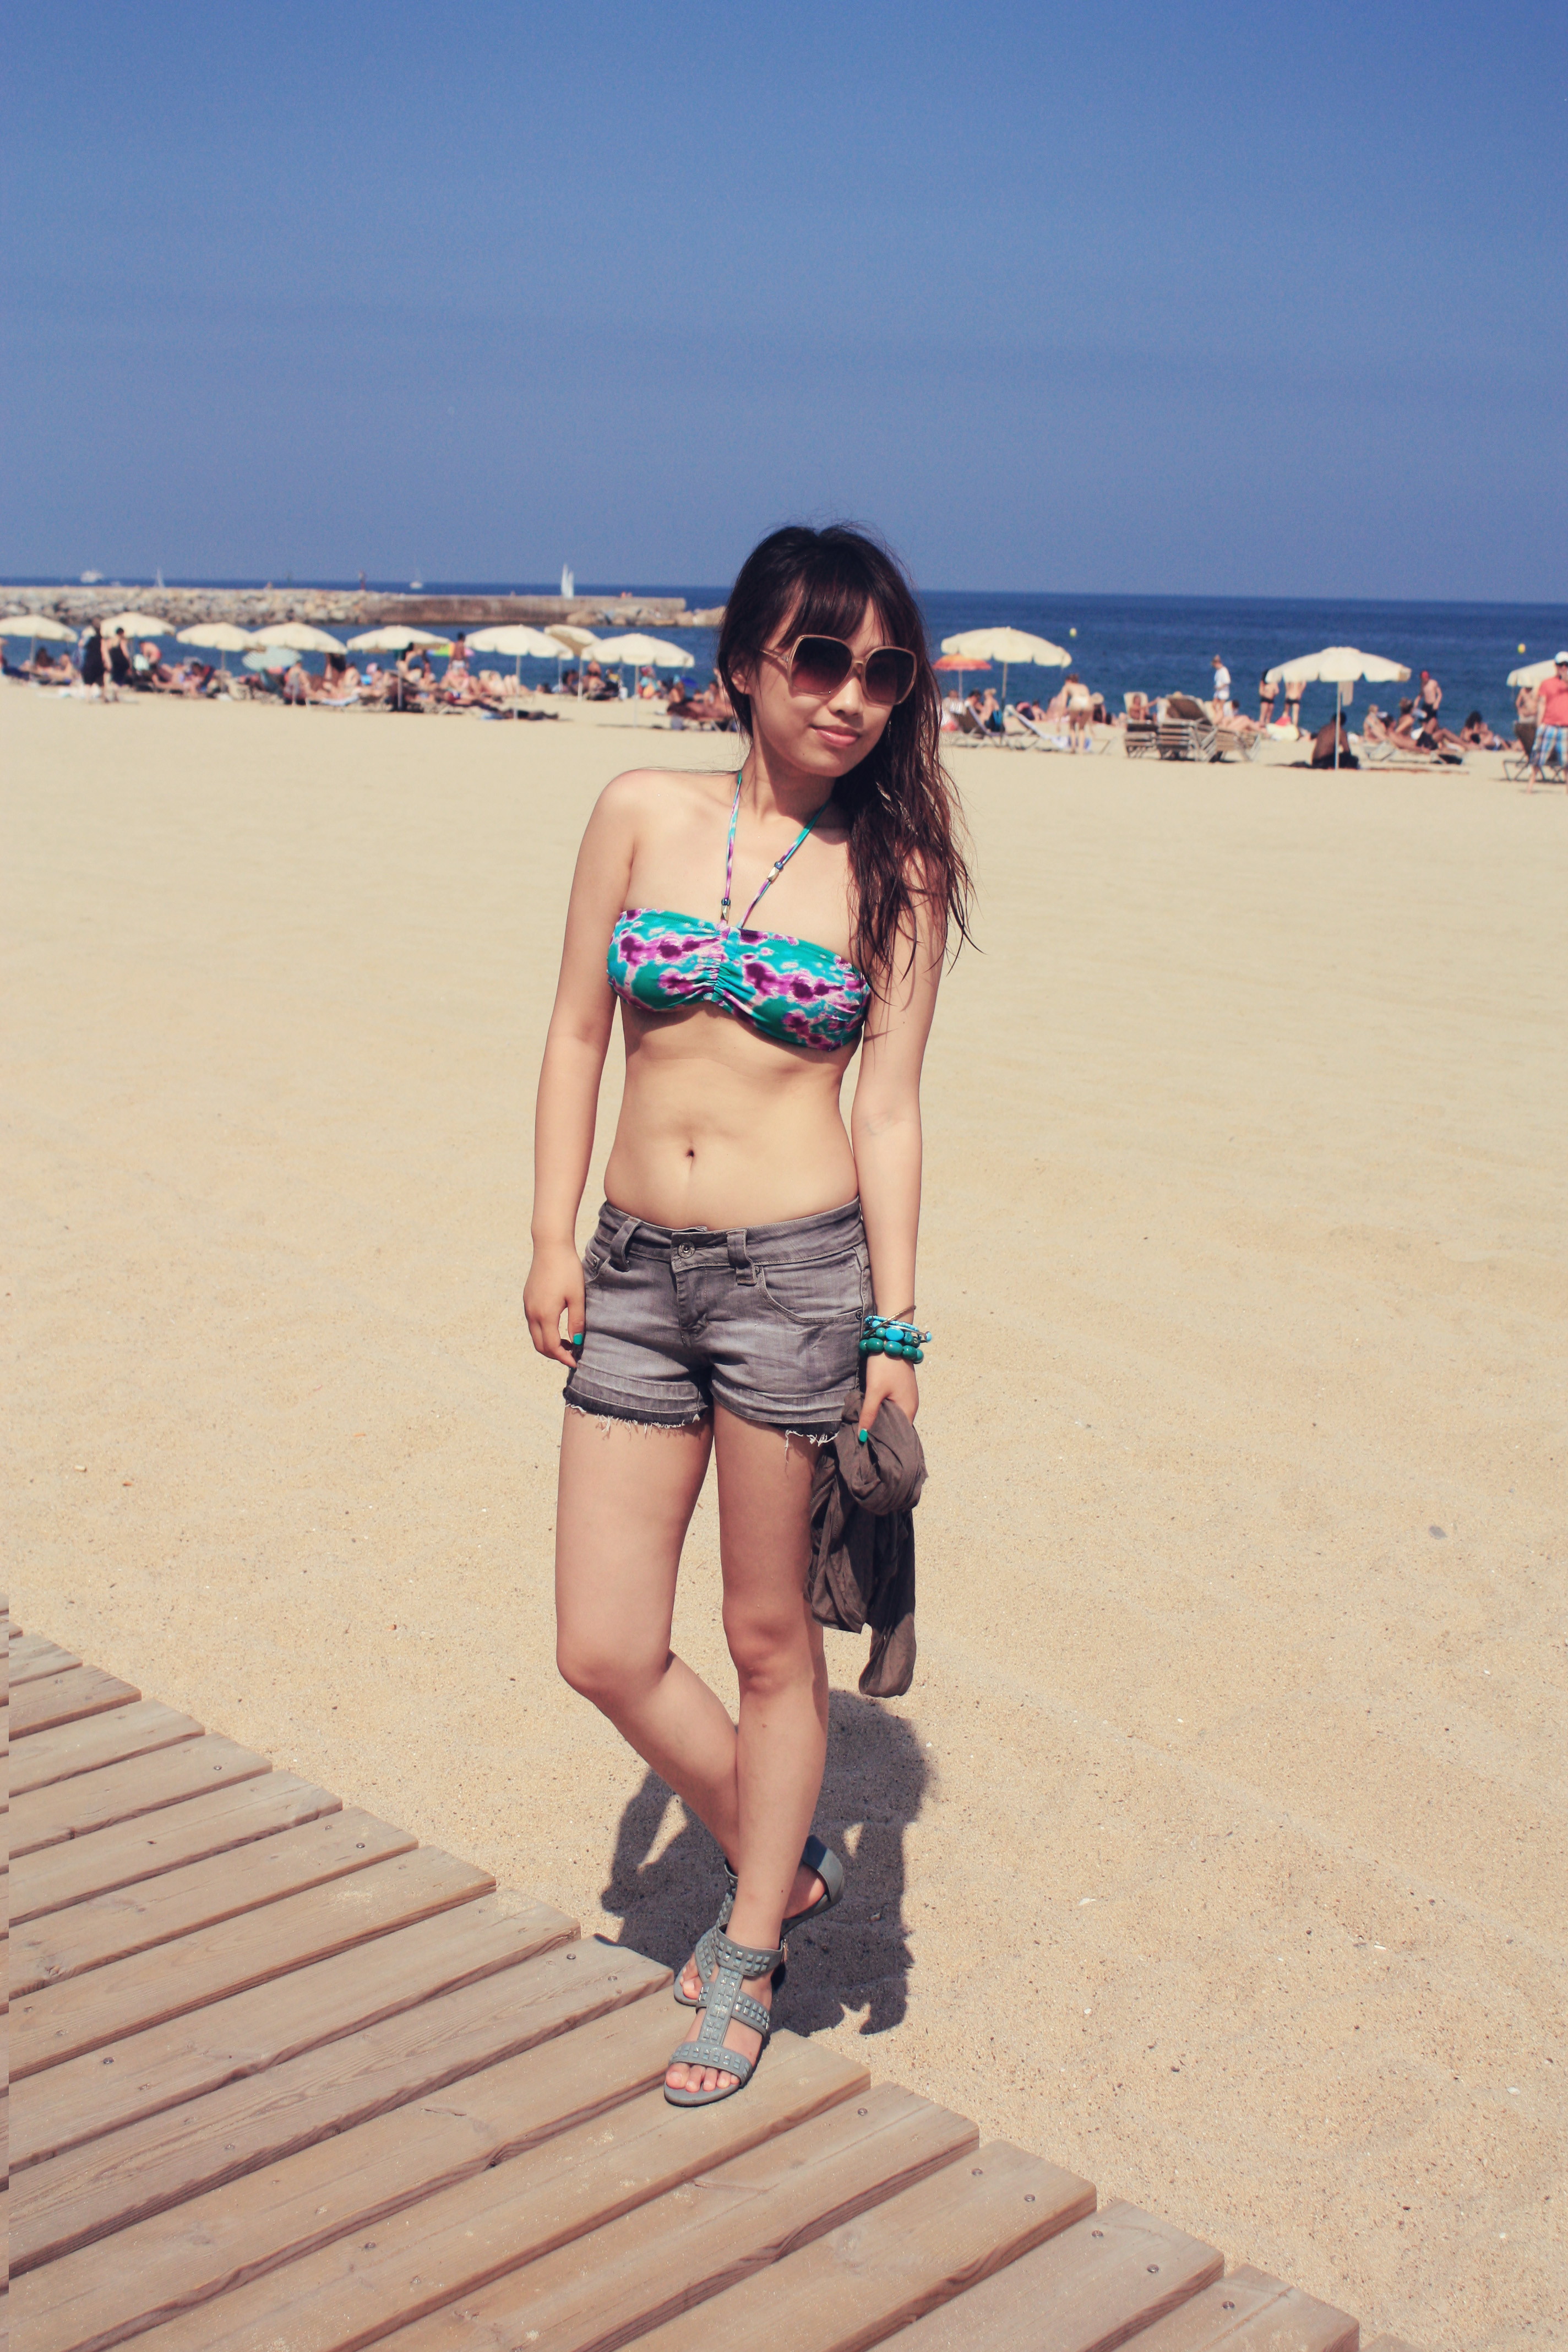 File:At the beach in Barcelona.jpg - Wikimedia Commons